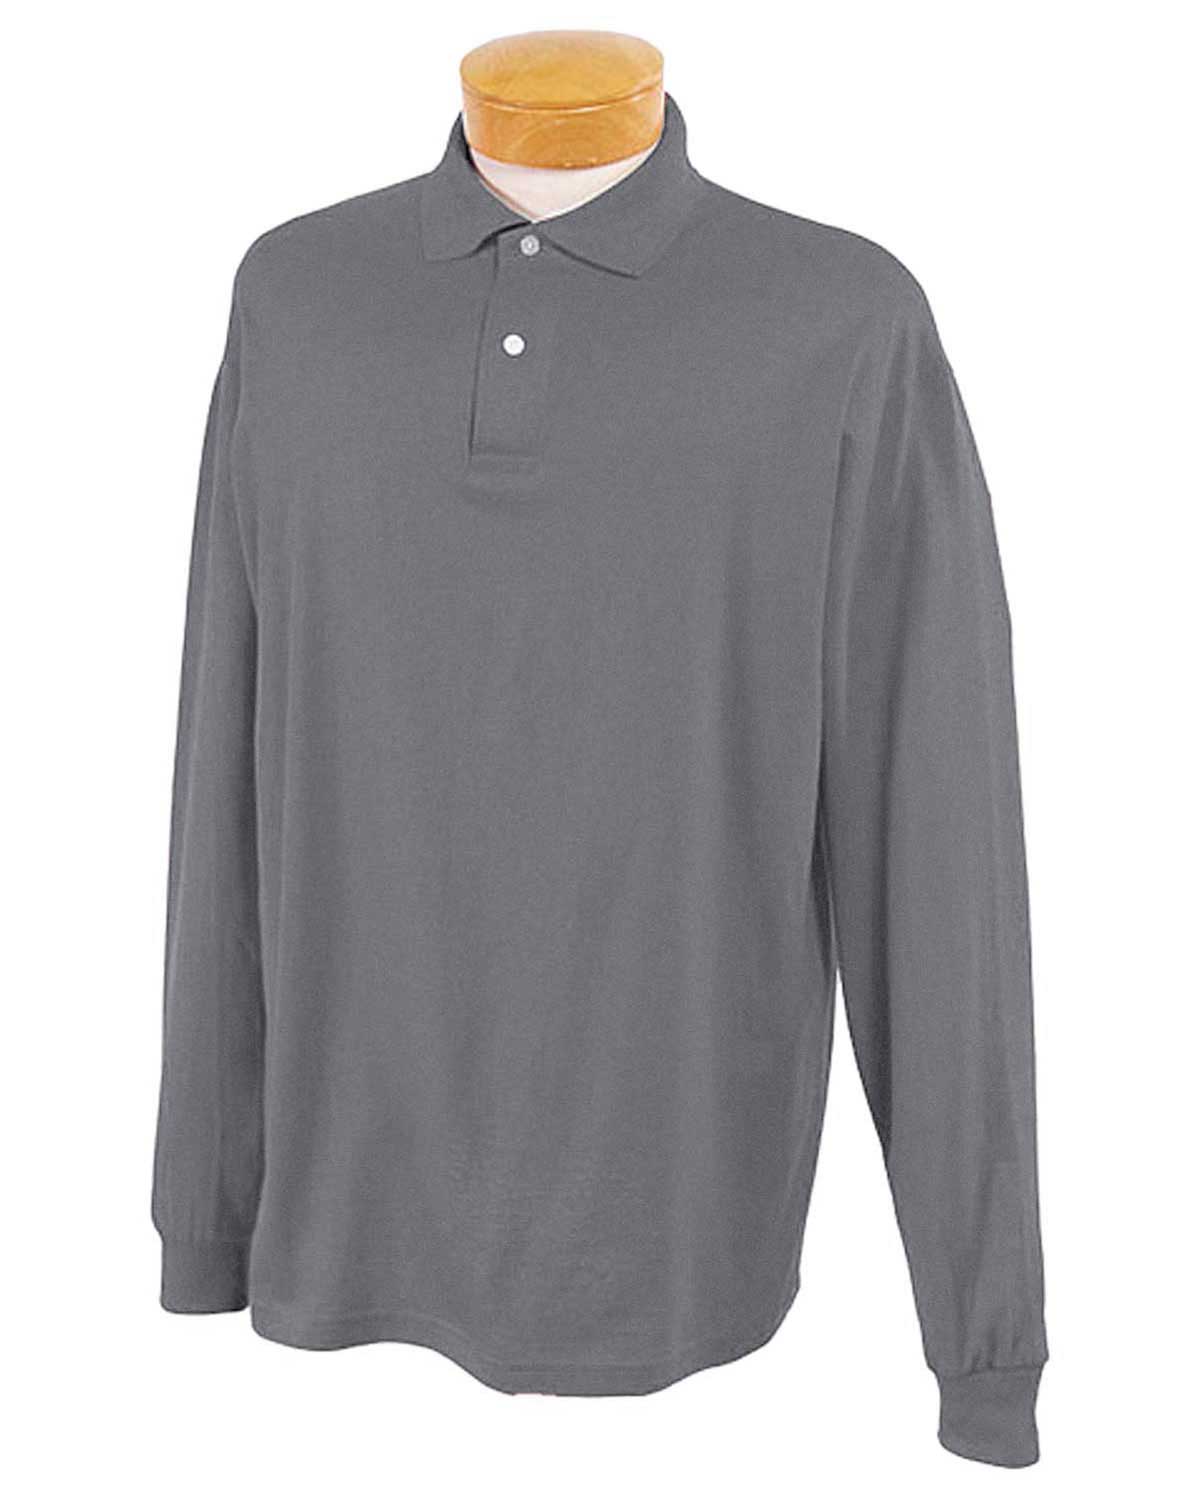 Jerzees 437ML Men 5.6 Oz. 50/50 Long-Sleeve Jersey Polo With Spotshield at Apparelstation